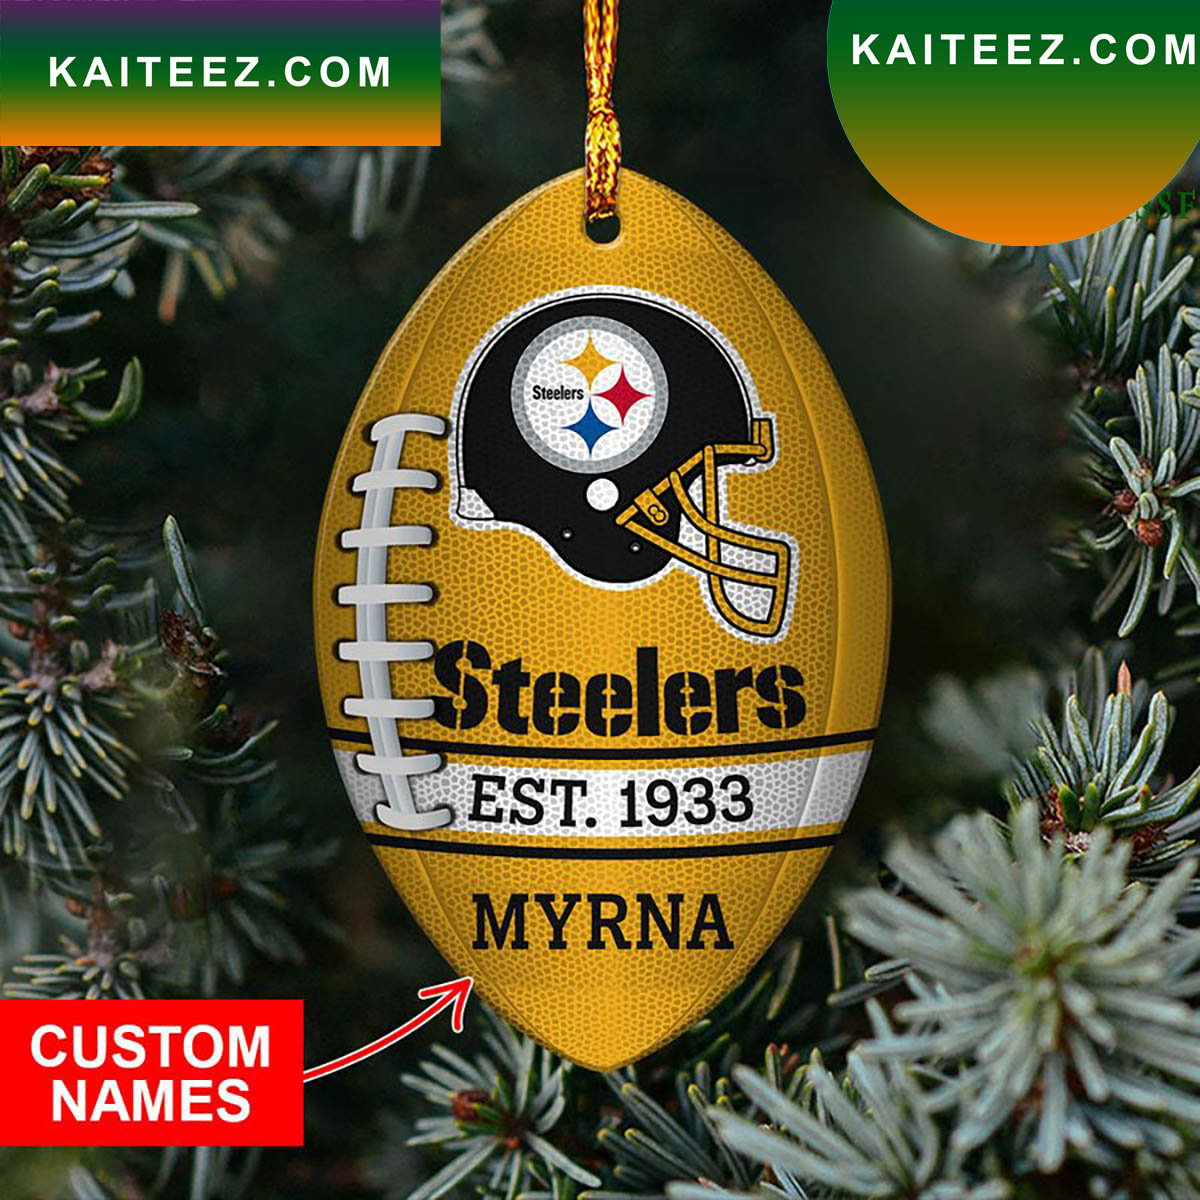 Mickey Mouse NFL Pittsburgh Steelers Christmas Ornament - LIMITED EDITION